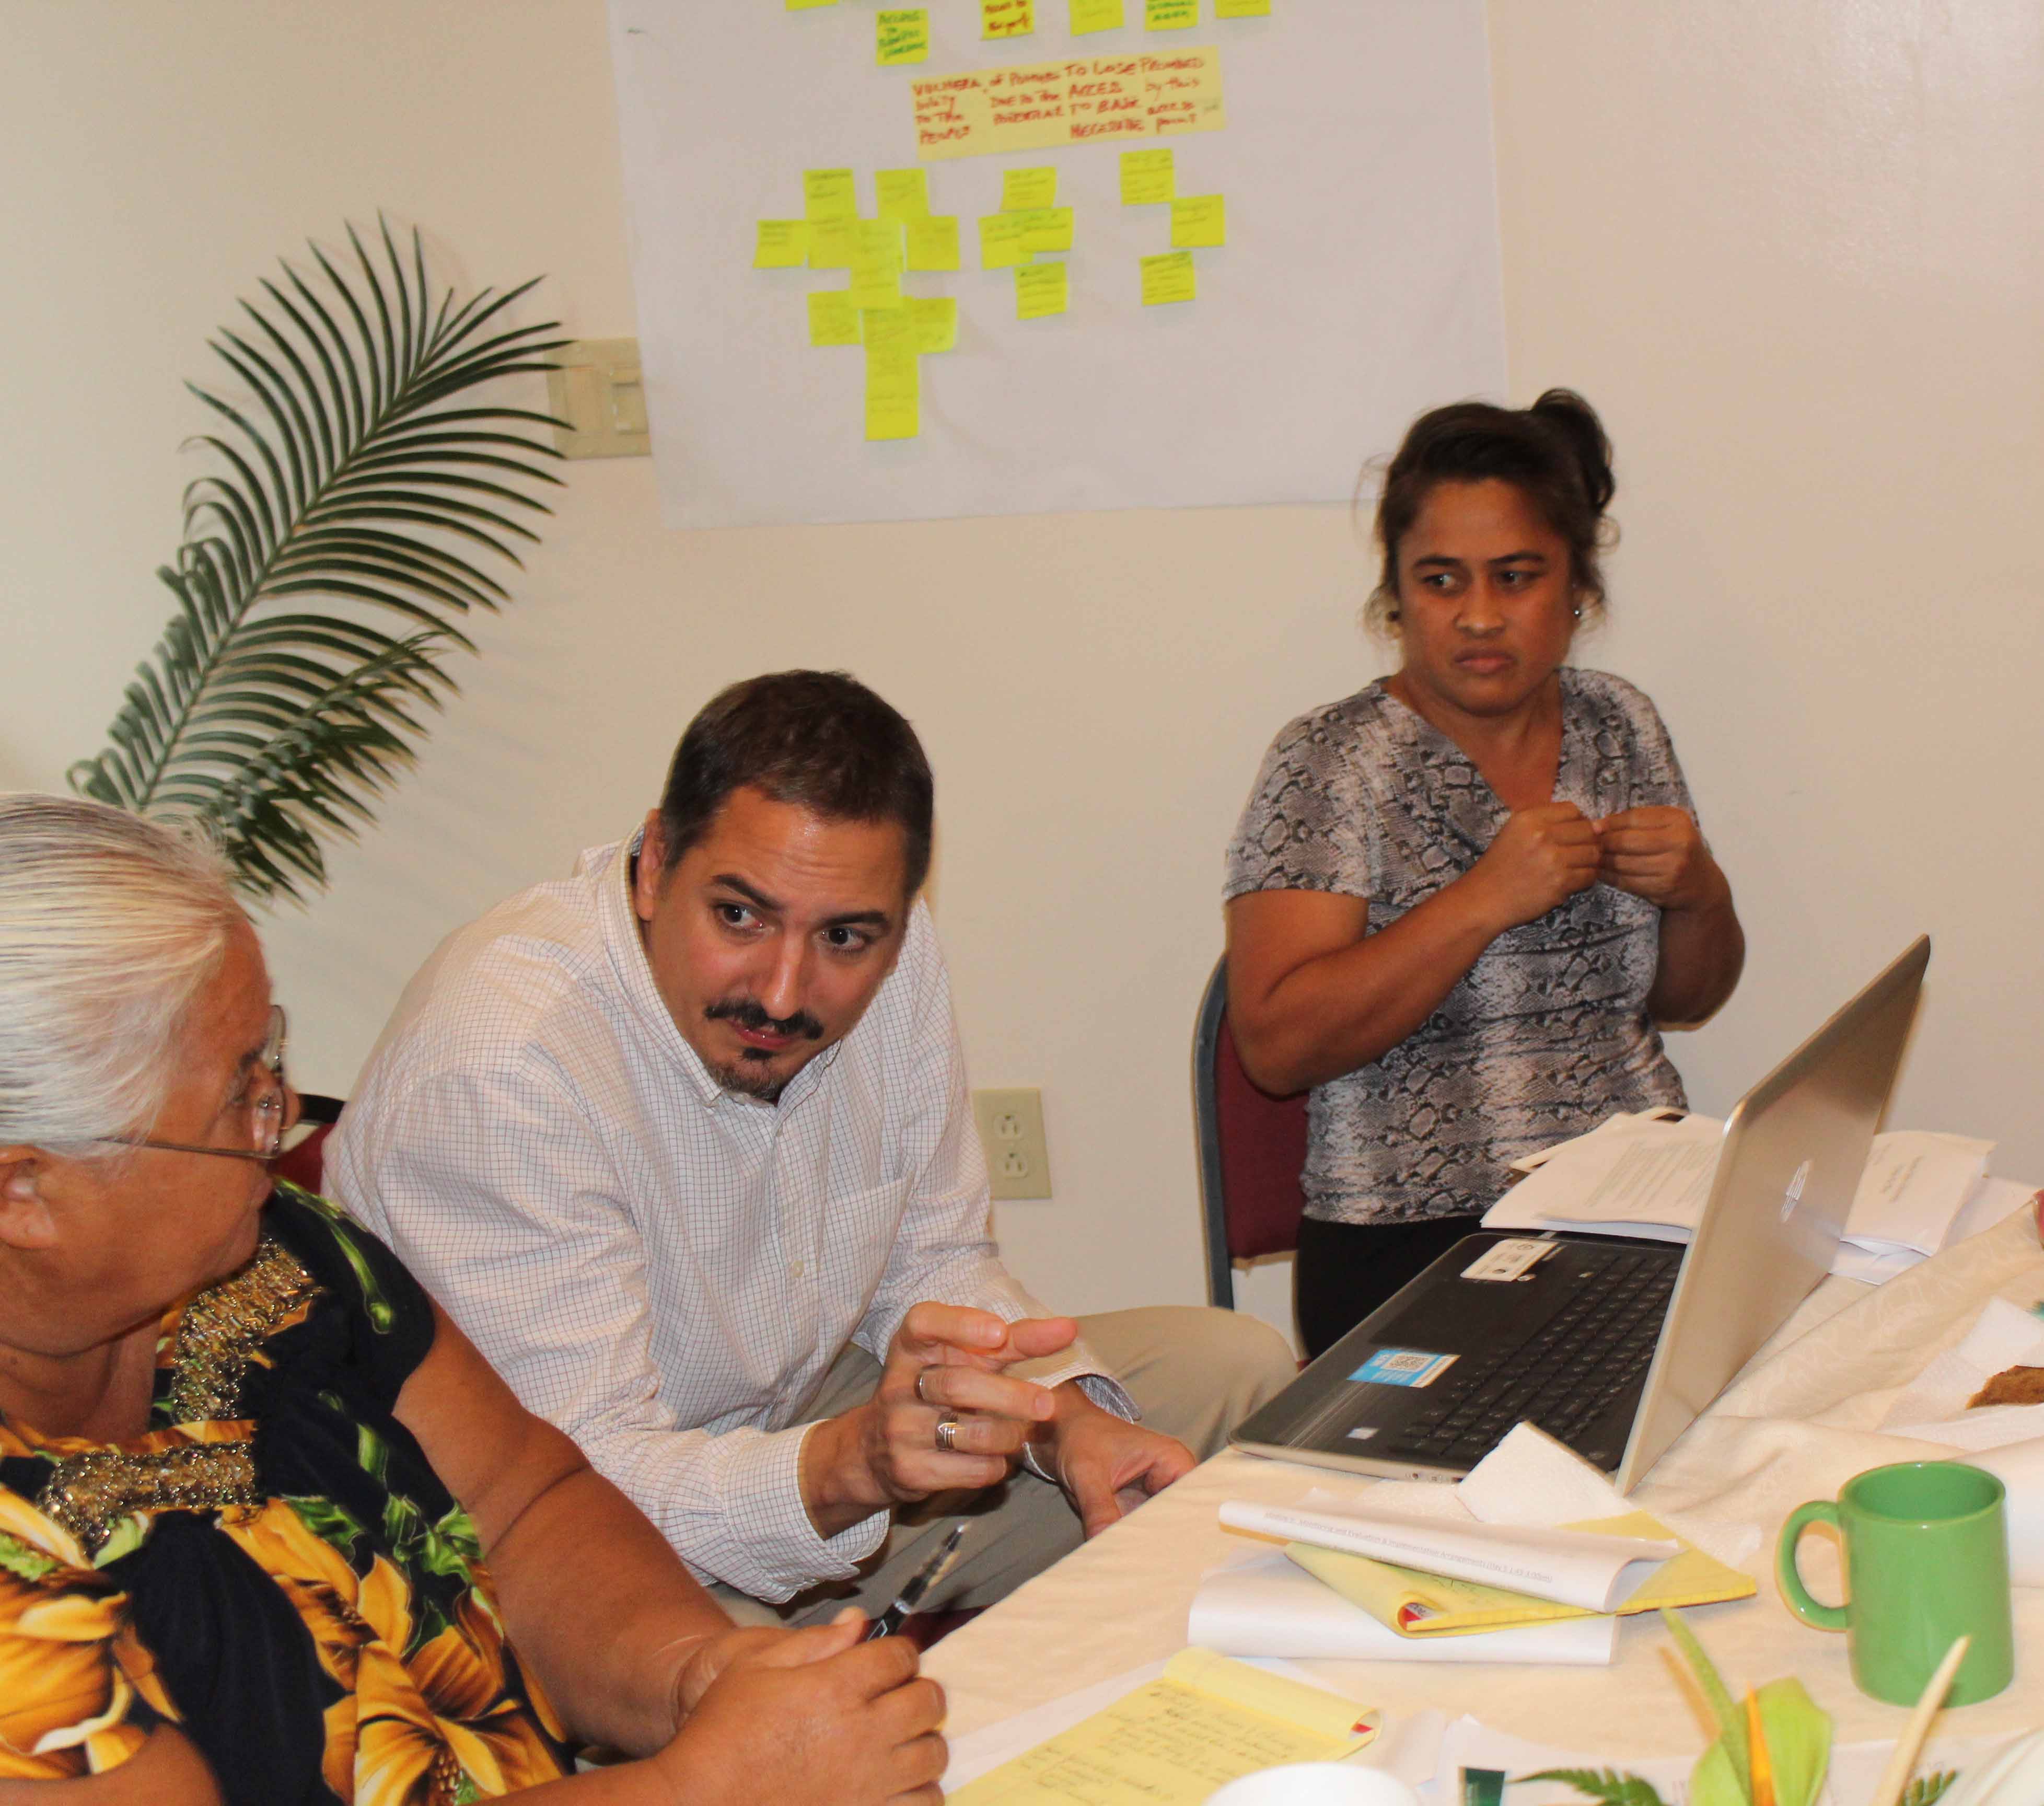 U.S. Government Partners with FSM Government to Conduct Project Preparation Training Program in the Federated States of Micronesia